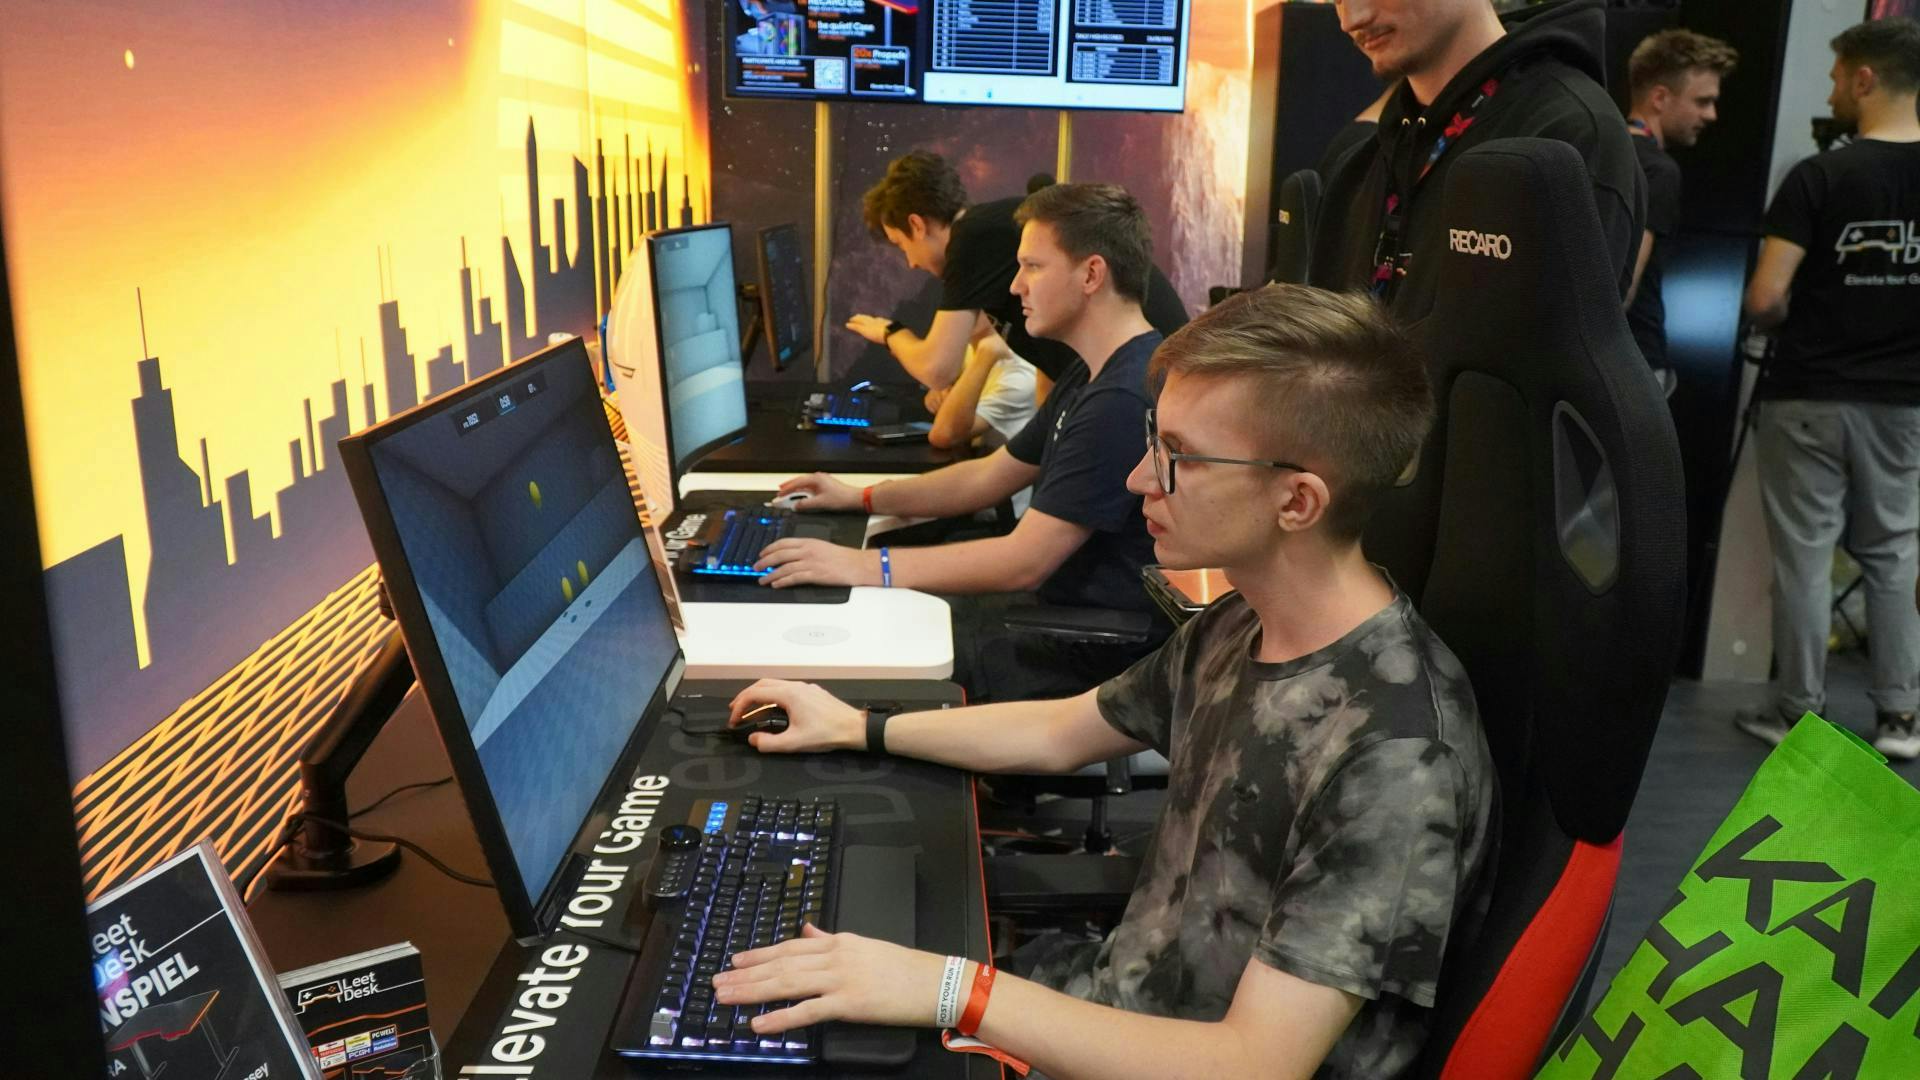 Gamescom visitors sit on LeetDesks and are taking part in the Aim Challenge  